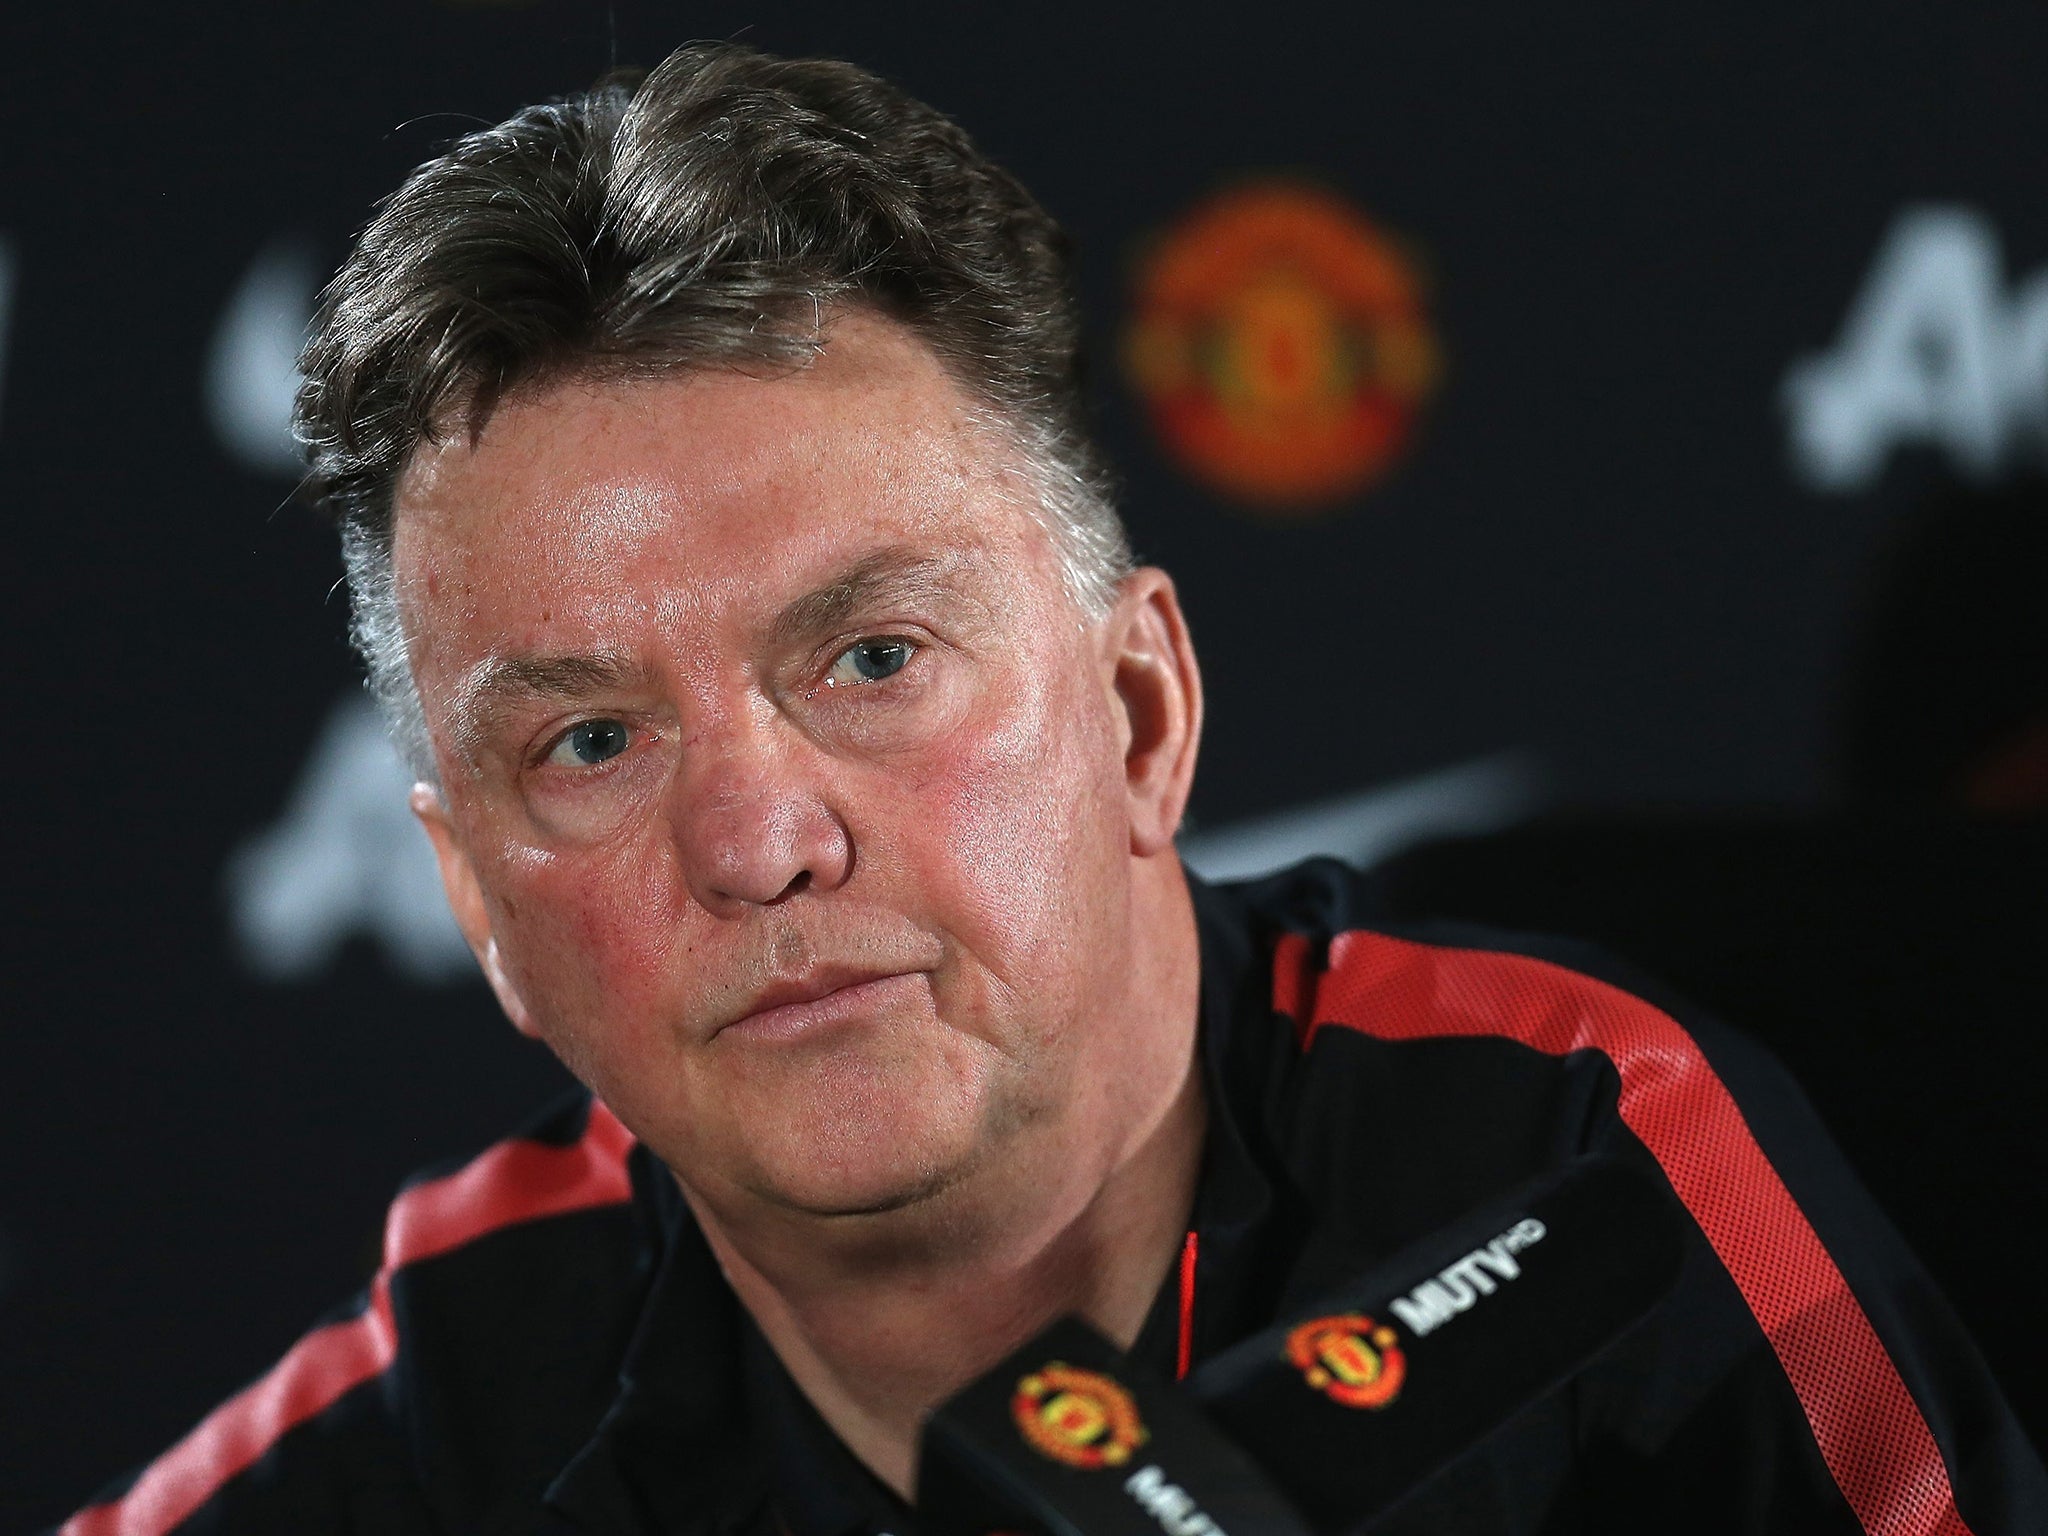 Louis van Gaal said of his No 2 Ryan Giggs: ‘Everyone can see we have a very good relationship’